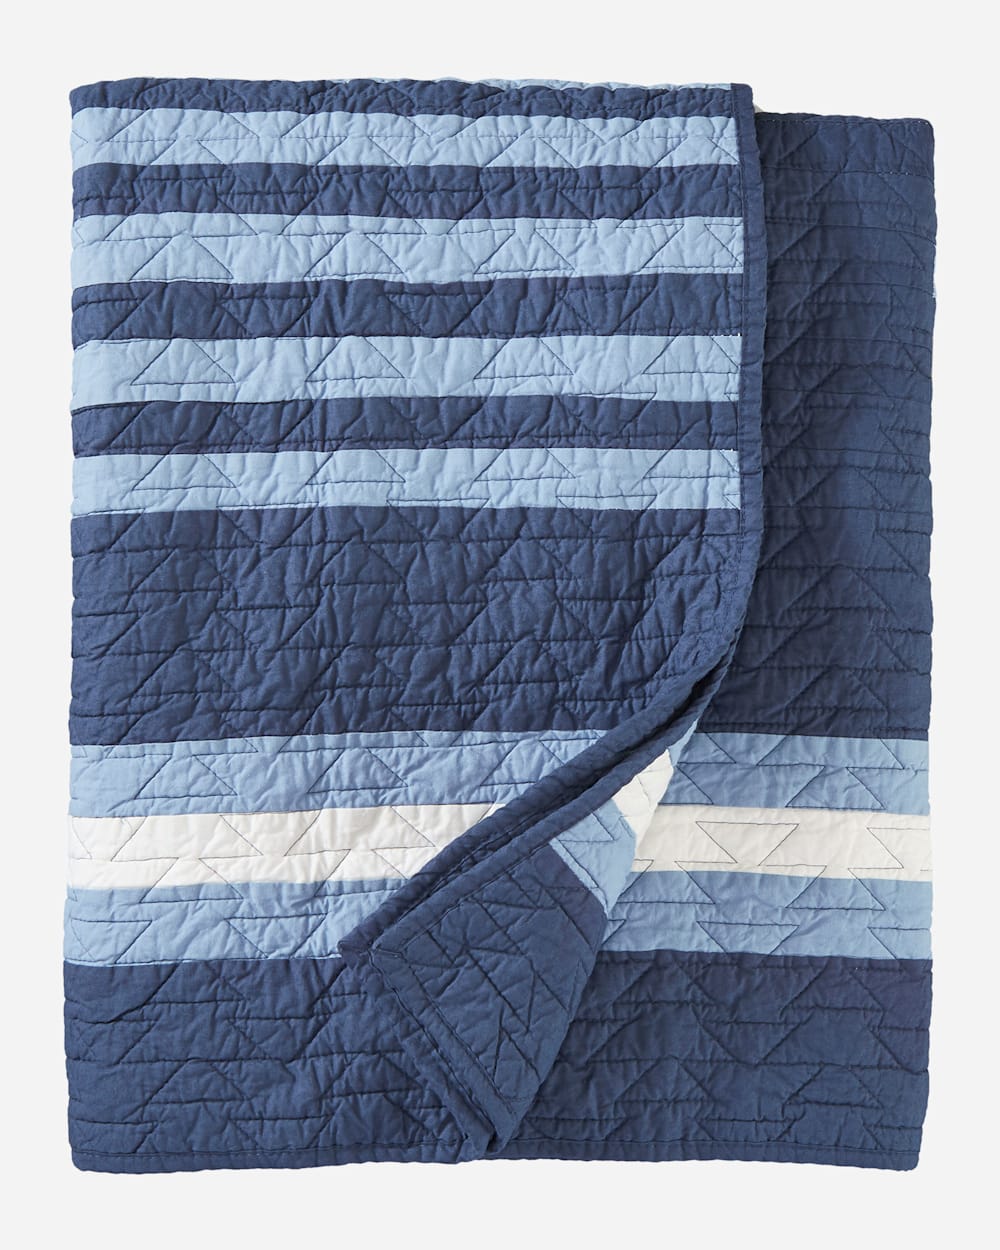 ALTERNATE VIEW OF CREEKSIDE PIECED QUILT IN INDIGO image number 1